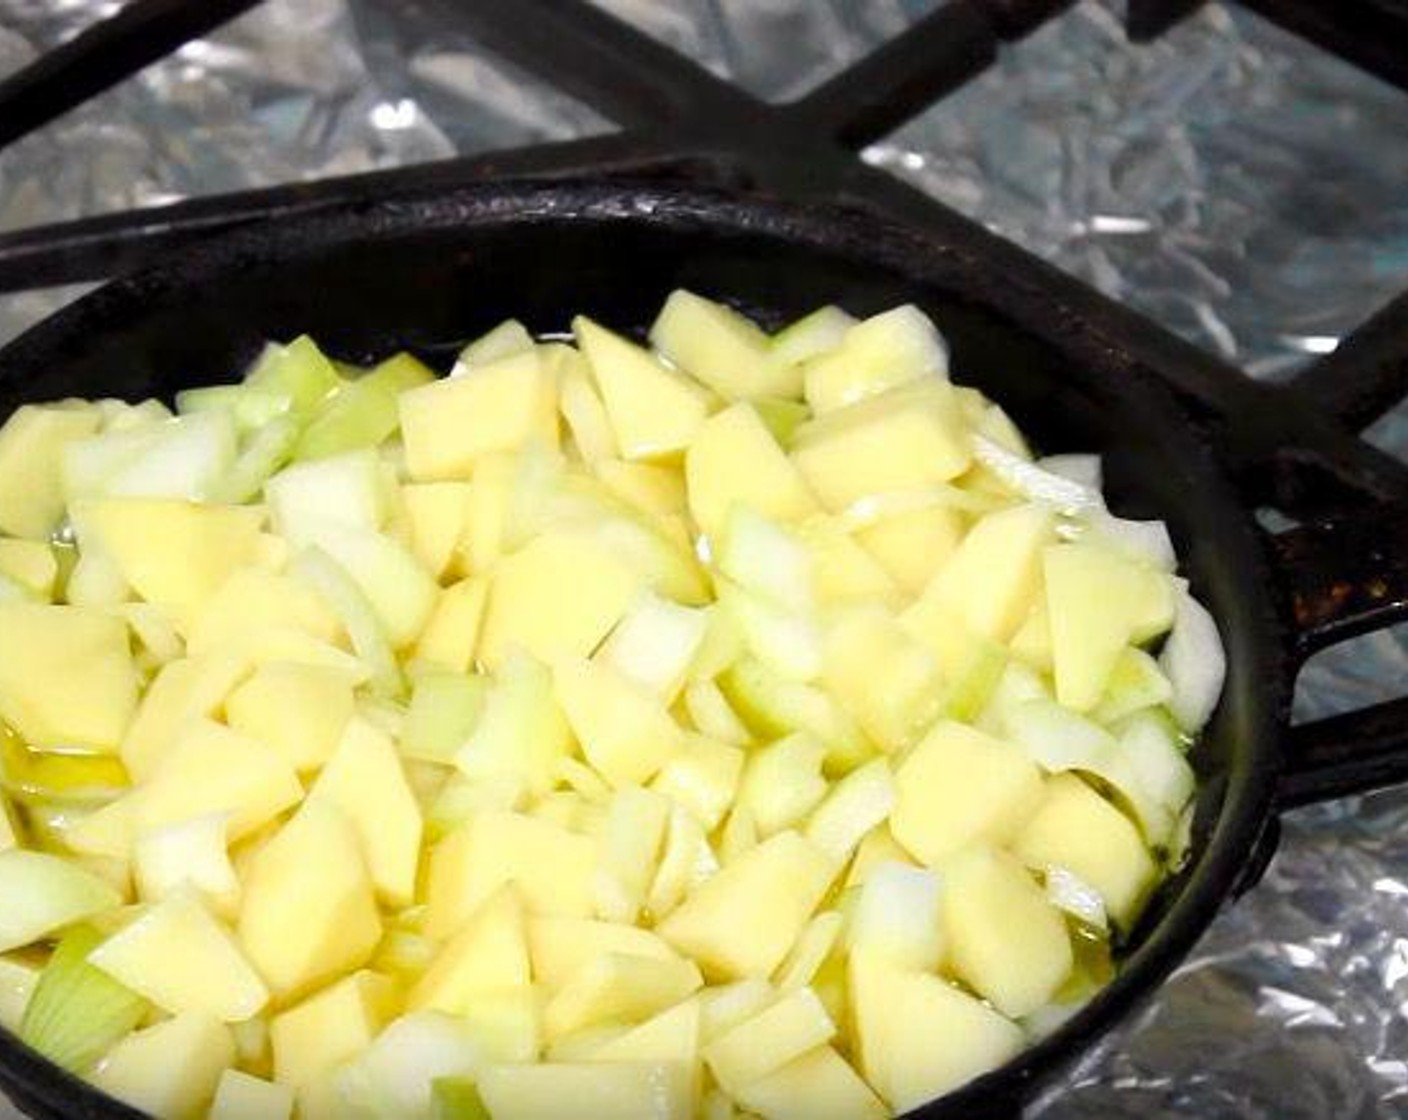 step 2 In a frying pan, heat Extra-Virgin Olive Oil (3/4 cup). Add potato and onion mixture. Cook for 18-20 minutes, stirring occasionally, until potatoes are tender. Remove with a slotted spoon and transfer to a clean mixing bowl.